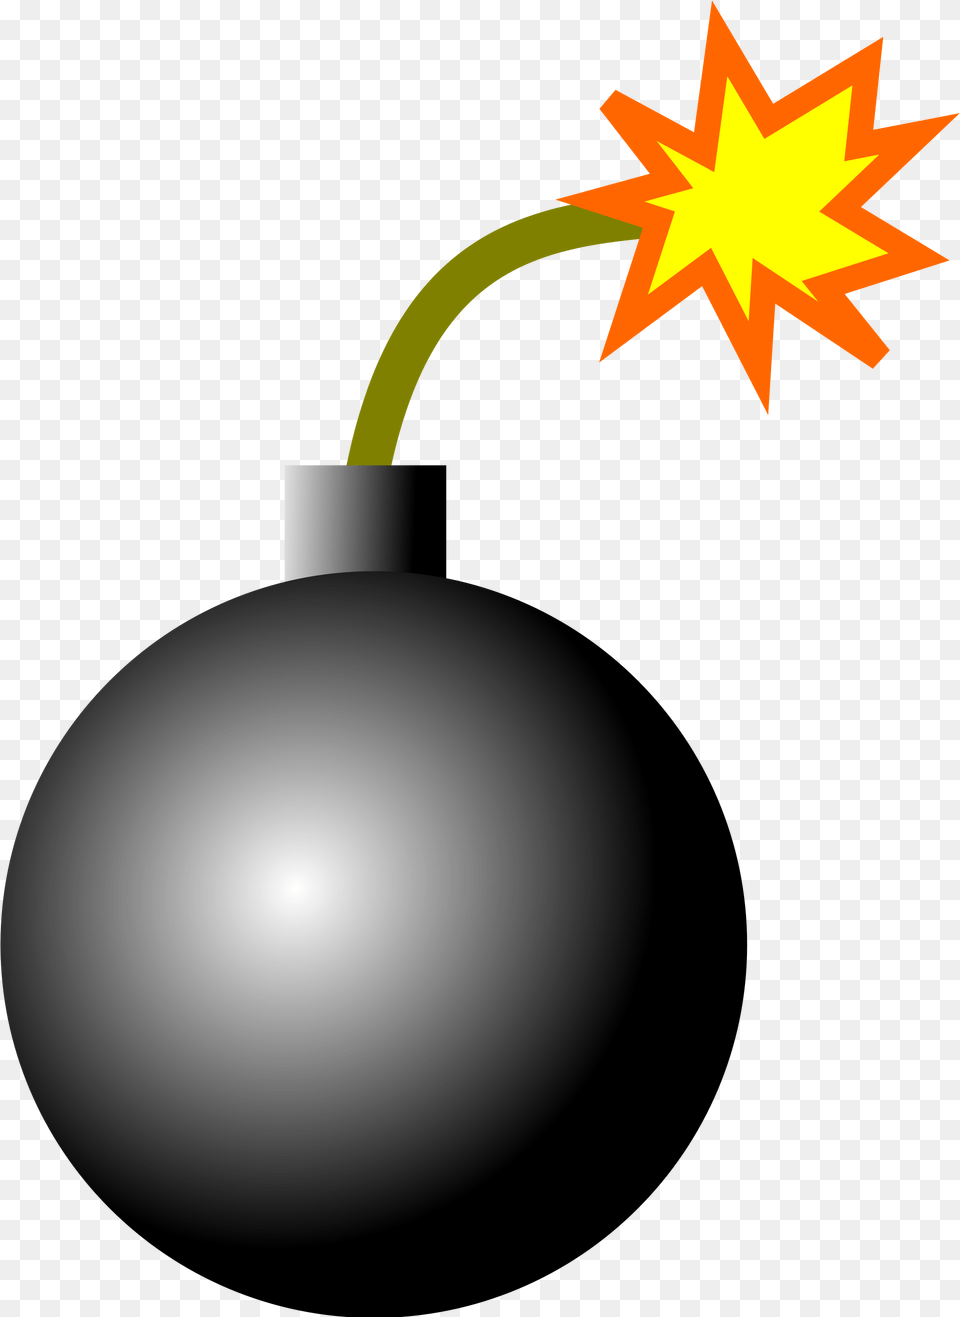 Explosion Clipart Grenade Background Bomb, Ammunition, Weapon, Lighting Png